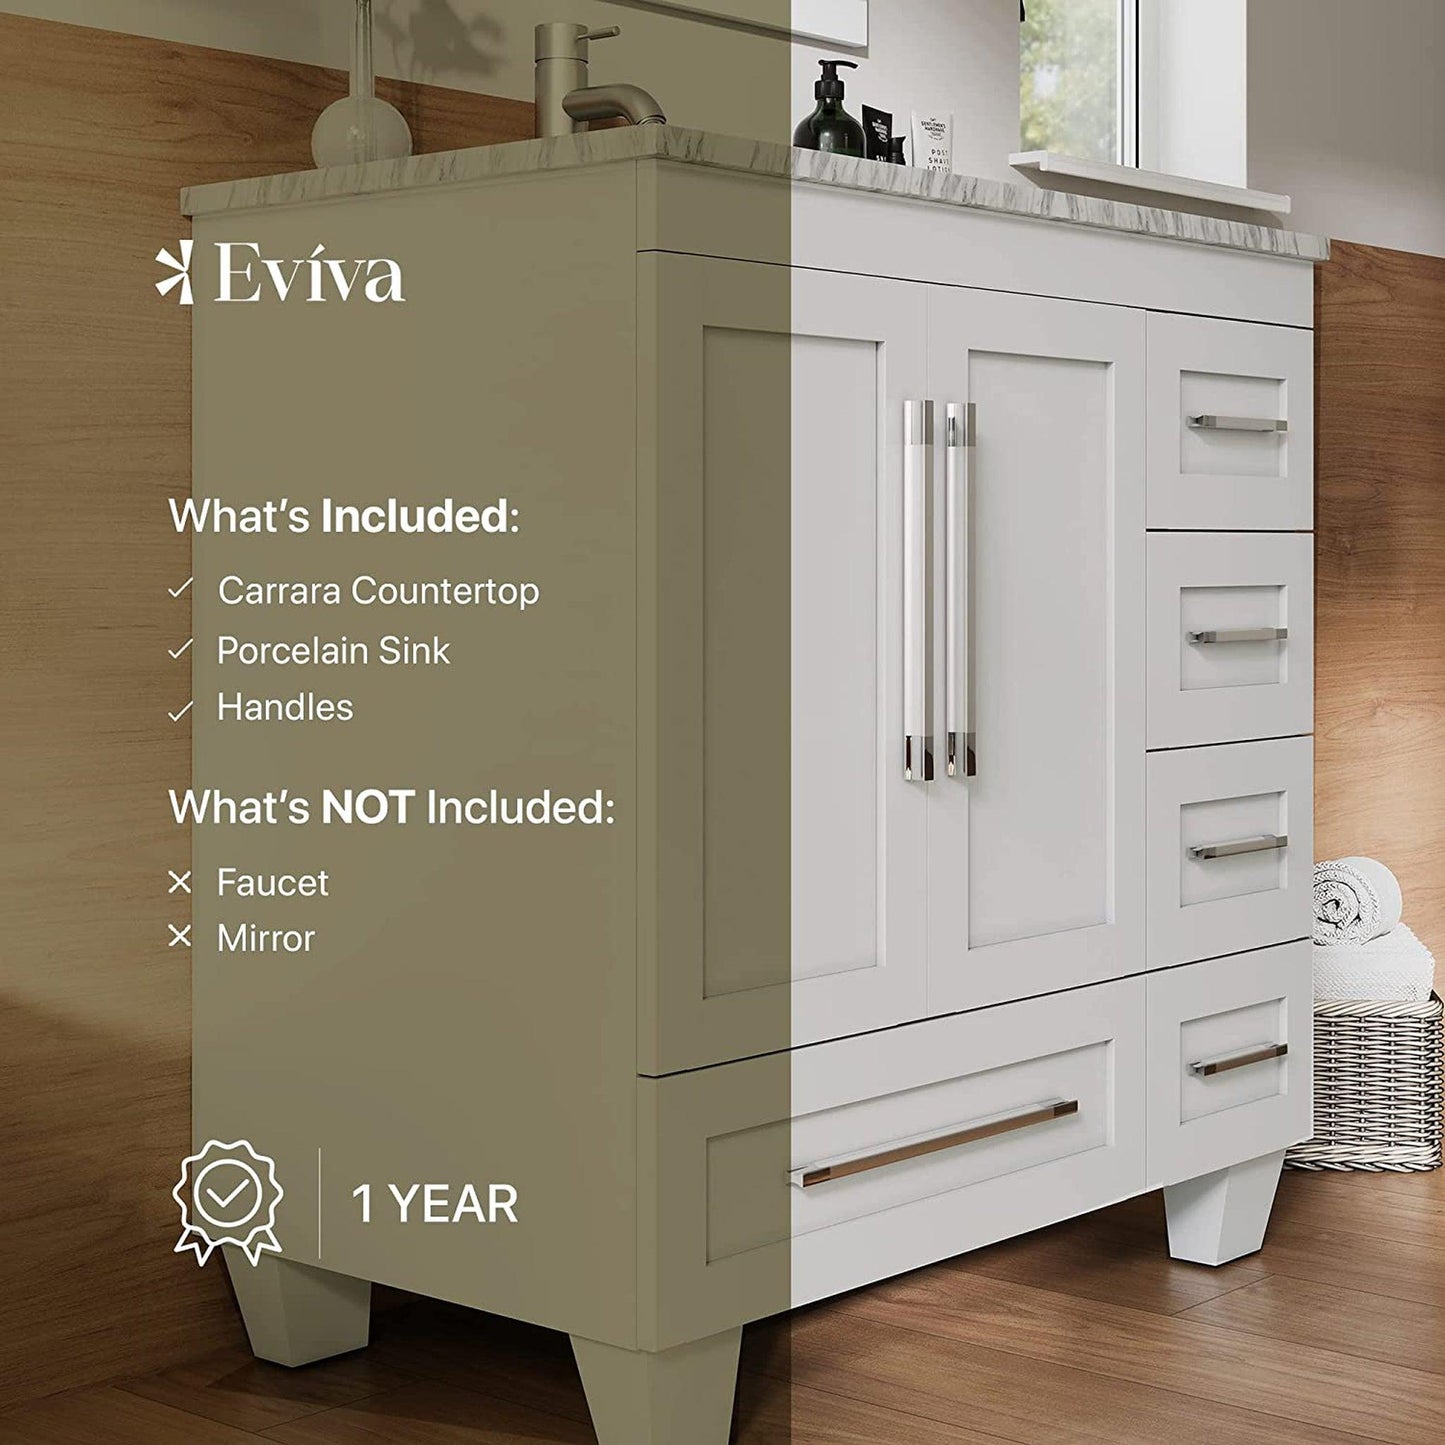 Eviva Loon 30" x 34" White Freestanding Bathroom Vanity With Carrara Marble Countertop and Undermount Porcelain Sink